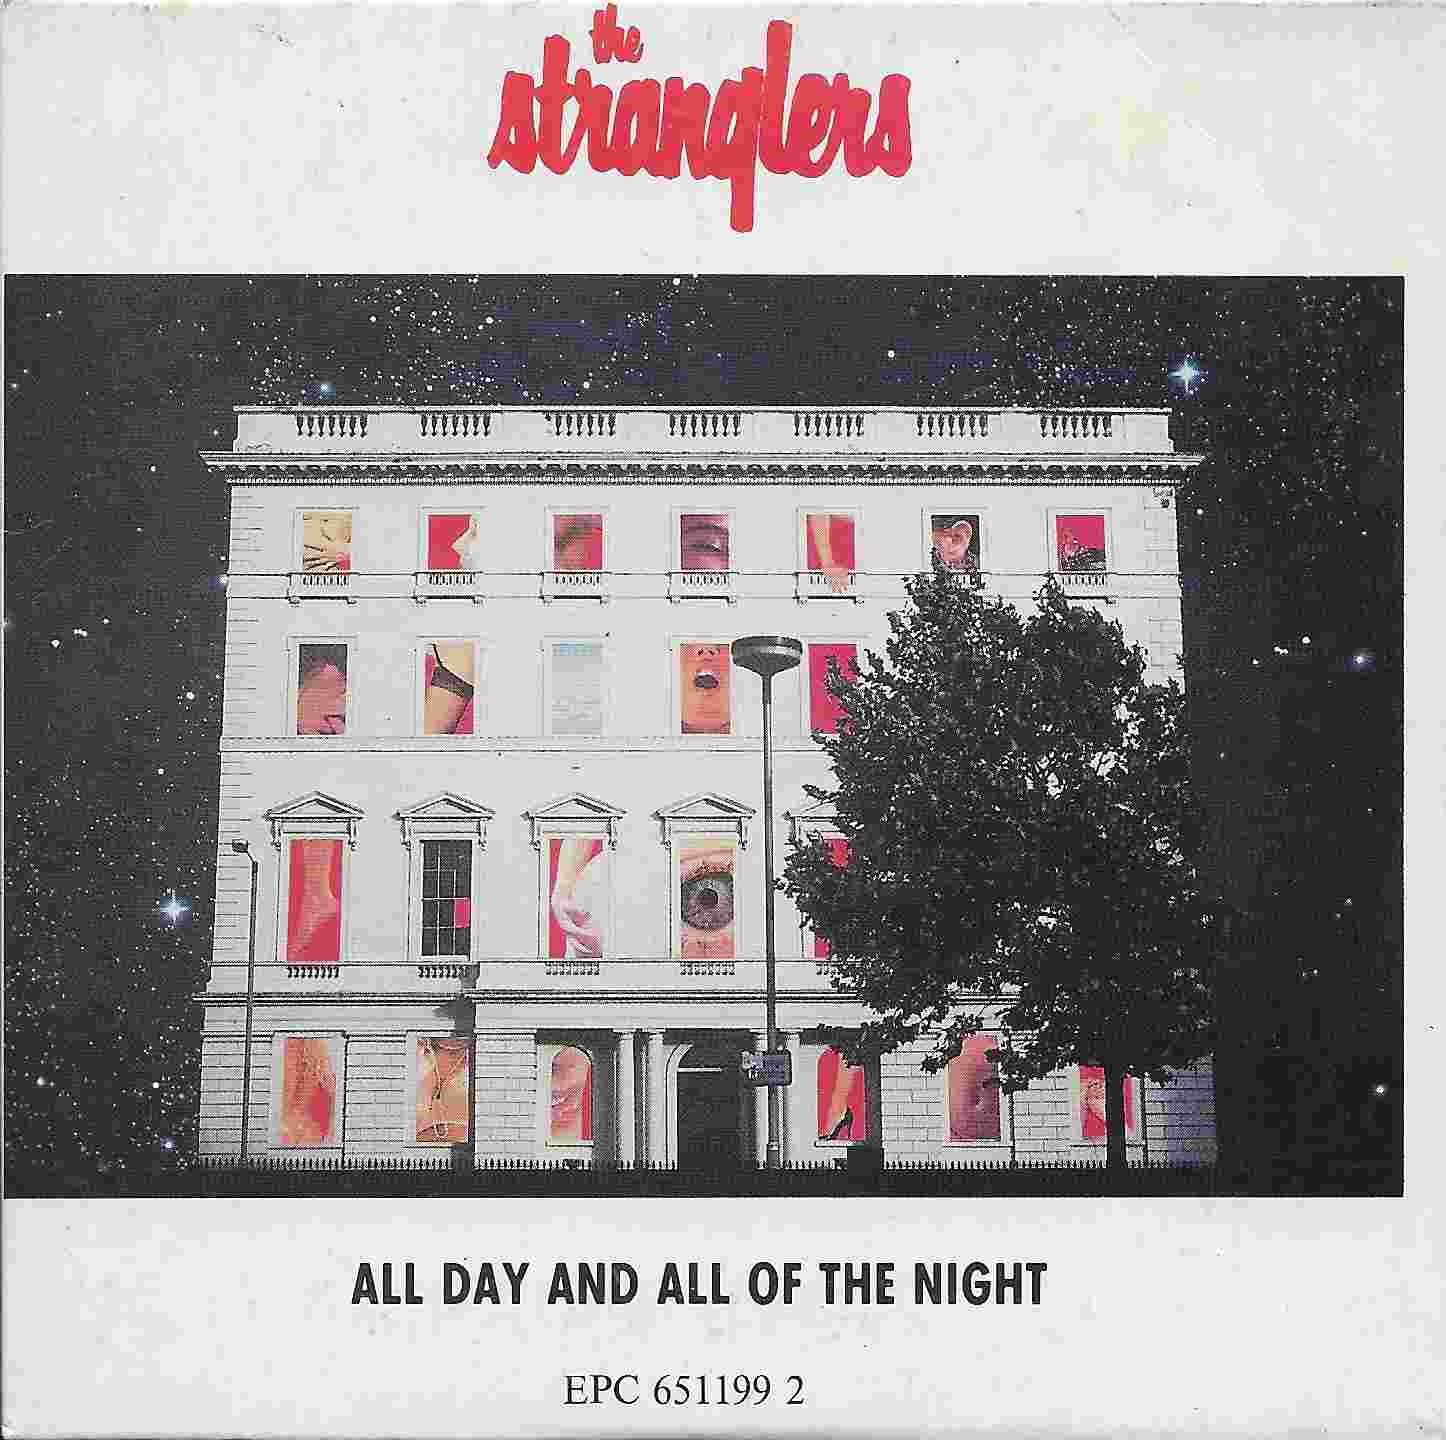 Picture of All day and all of the night by artist The Stranglers from The Stranglers cdsingles